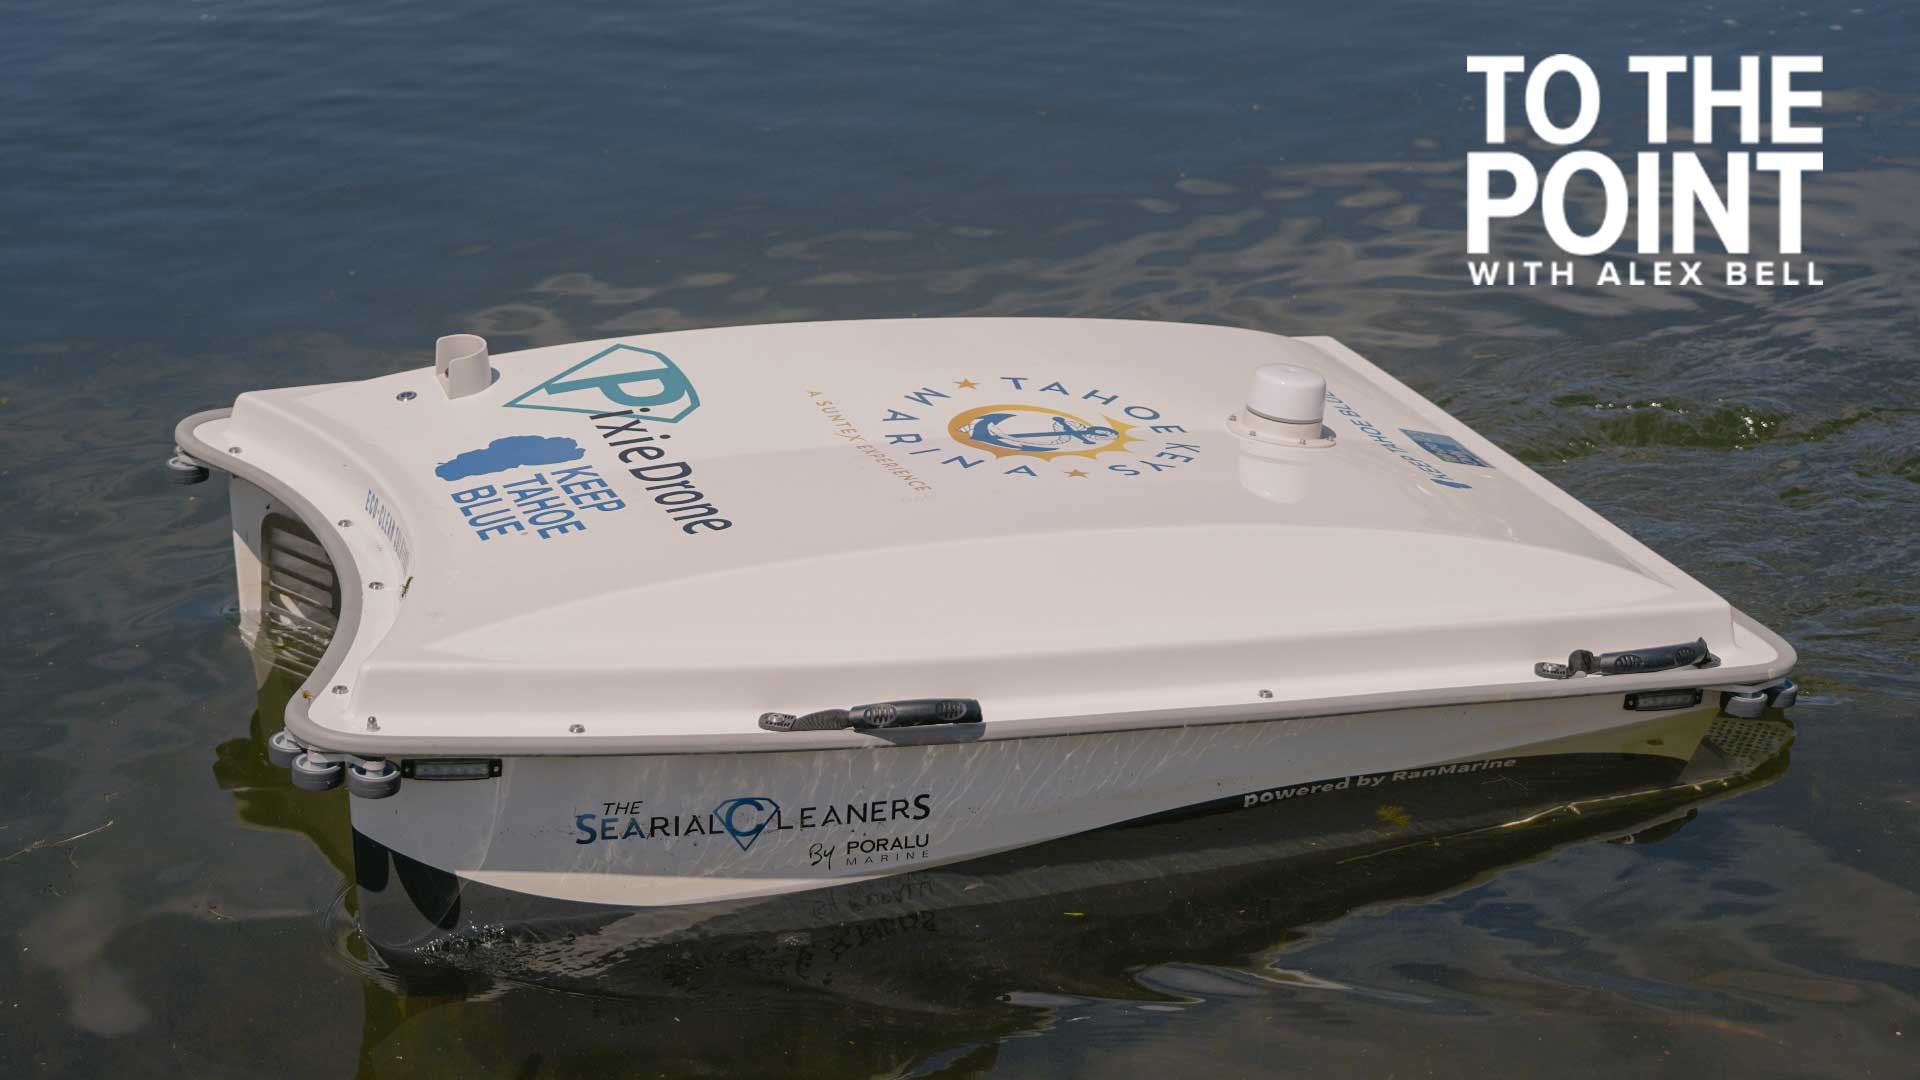 Meet PixieDrone, the state-of-the-art aquatic robot keeping Tahoe blue